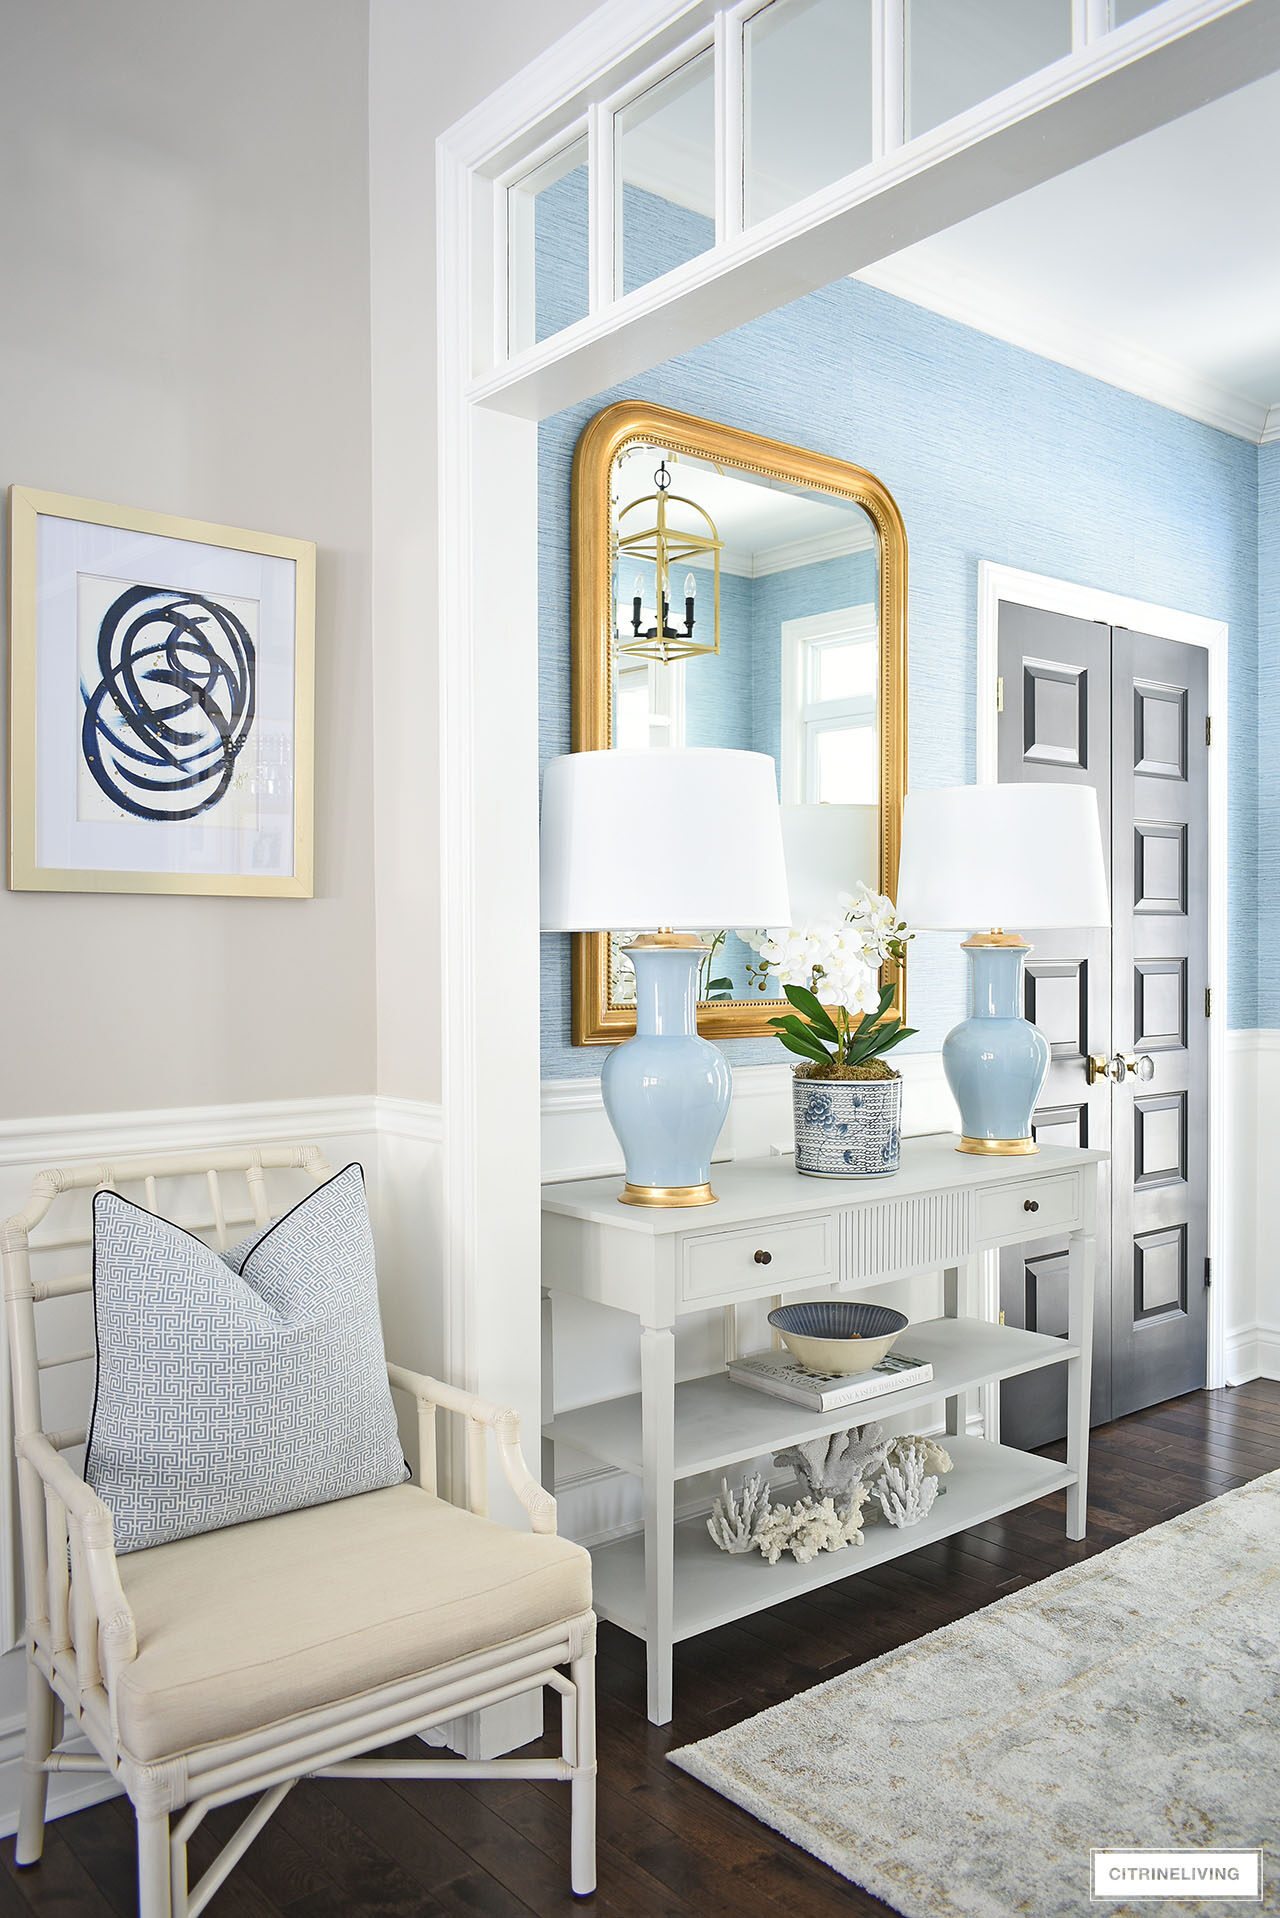 Entryway decorated for spring with blue lamps, large gold statement mirror and a soft muted rug